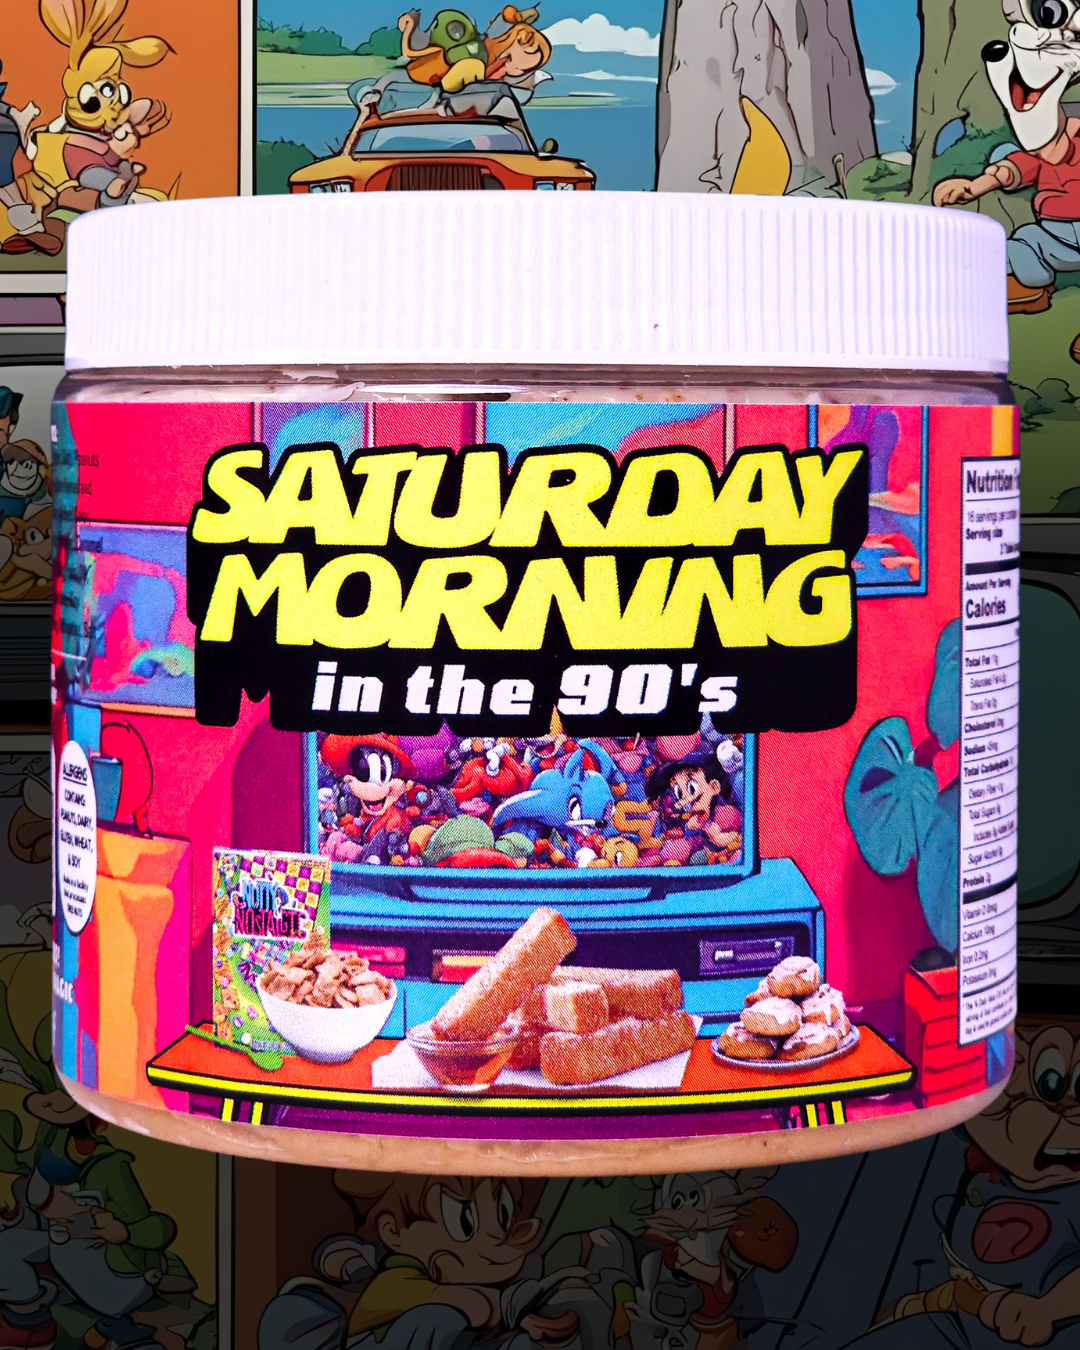 SATURDAY MORNING IN THE 90'S